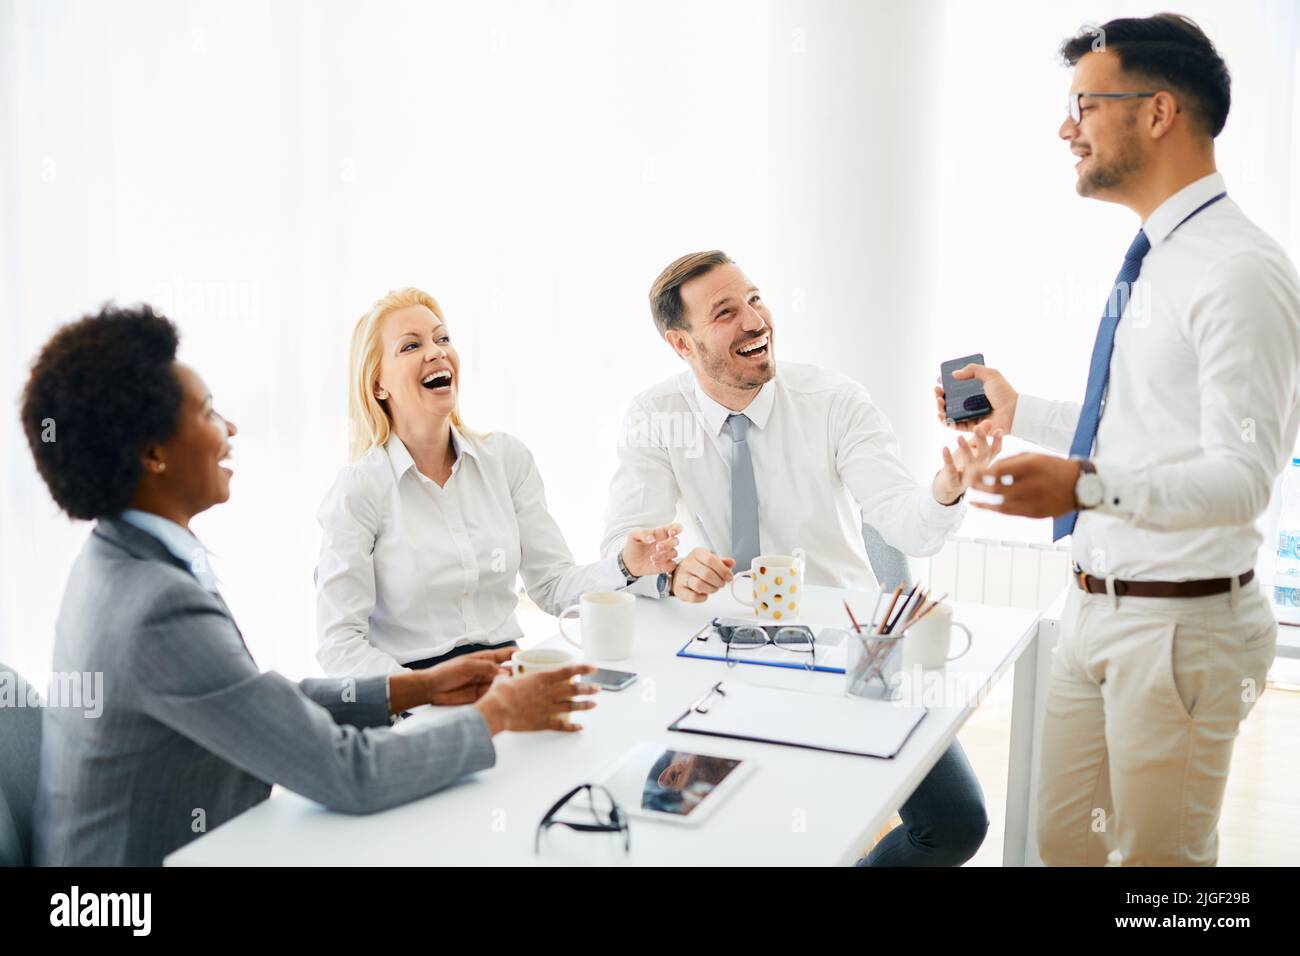 young business people meeting office teamwork group success corporatye discussion Stock Photo